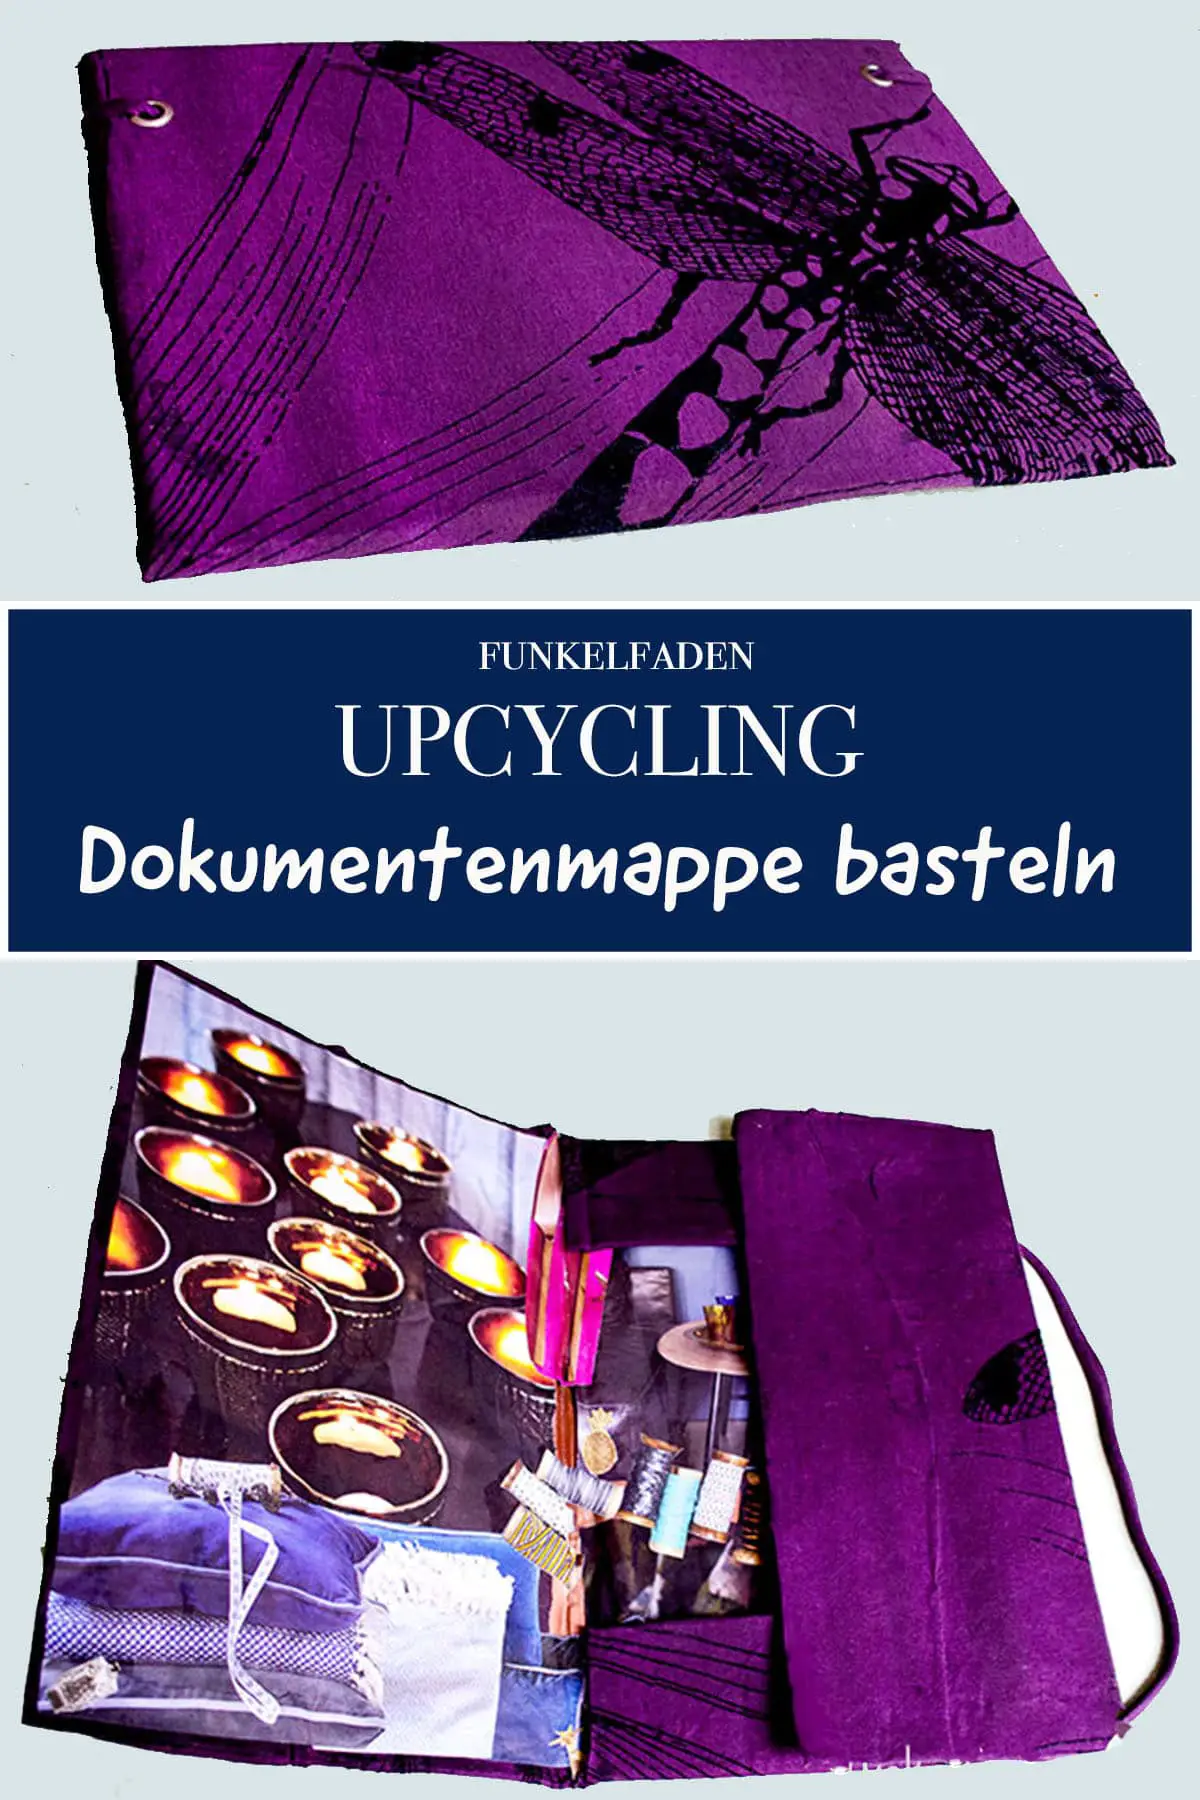 Anzeige Upcycling – Dokumentenmappe aus T-Shirt + Pappe